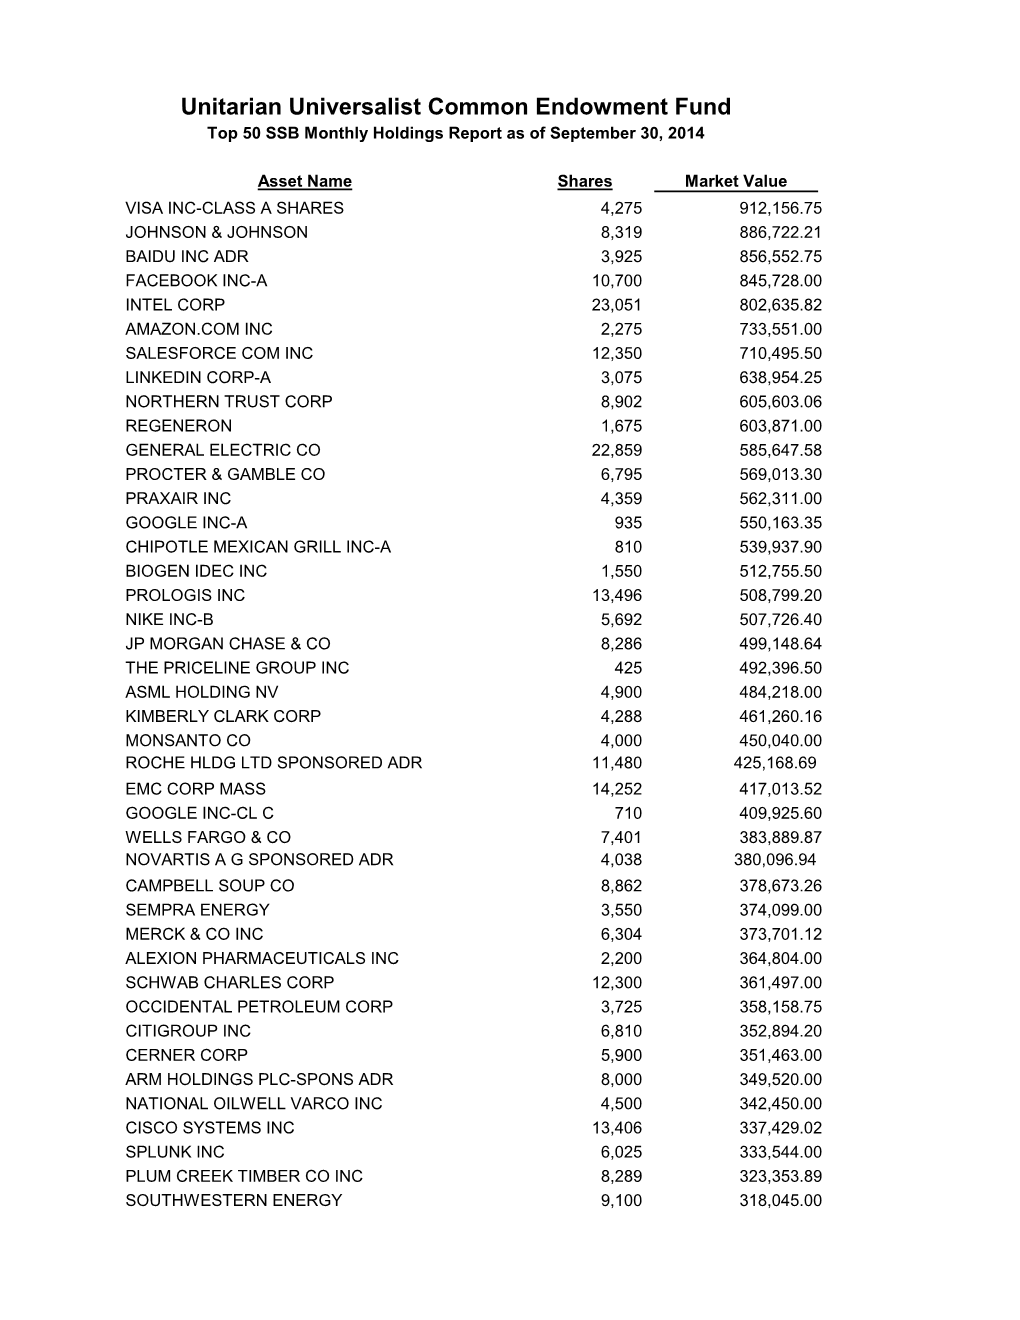 Unitarian Universalist Common Endowment Fund Top 50 SSB Monthly Holdings Report As of September 30, 2014